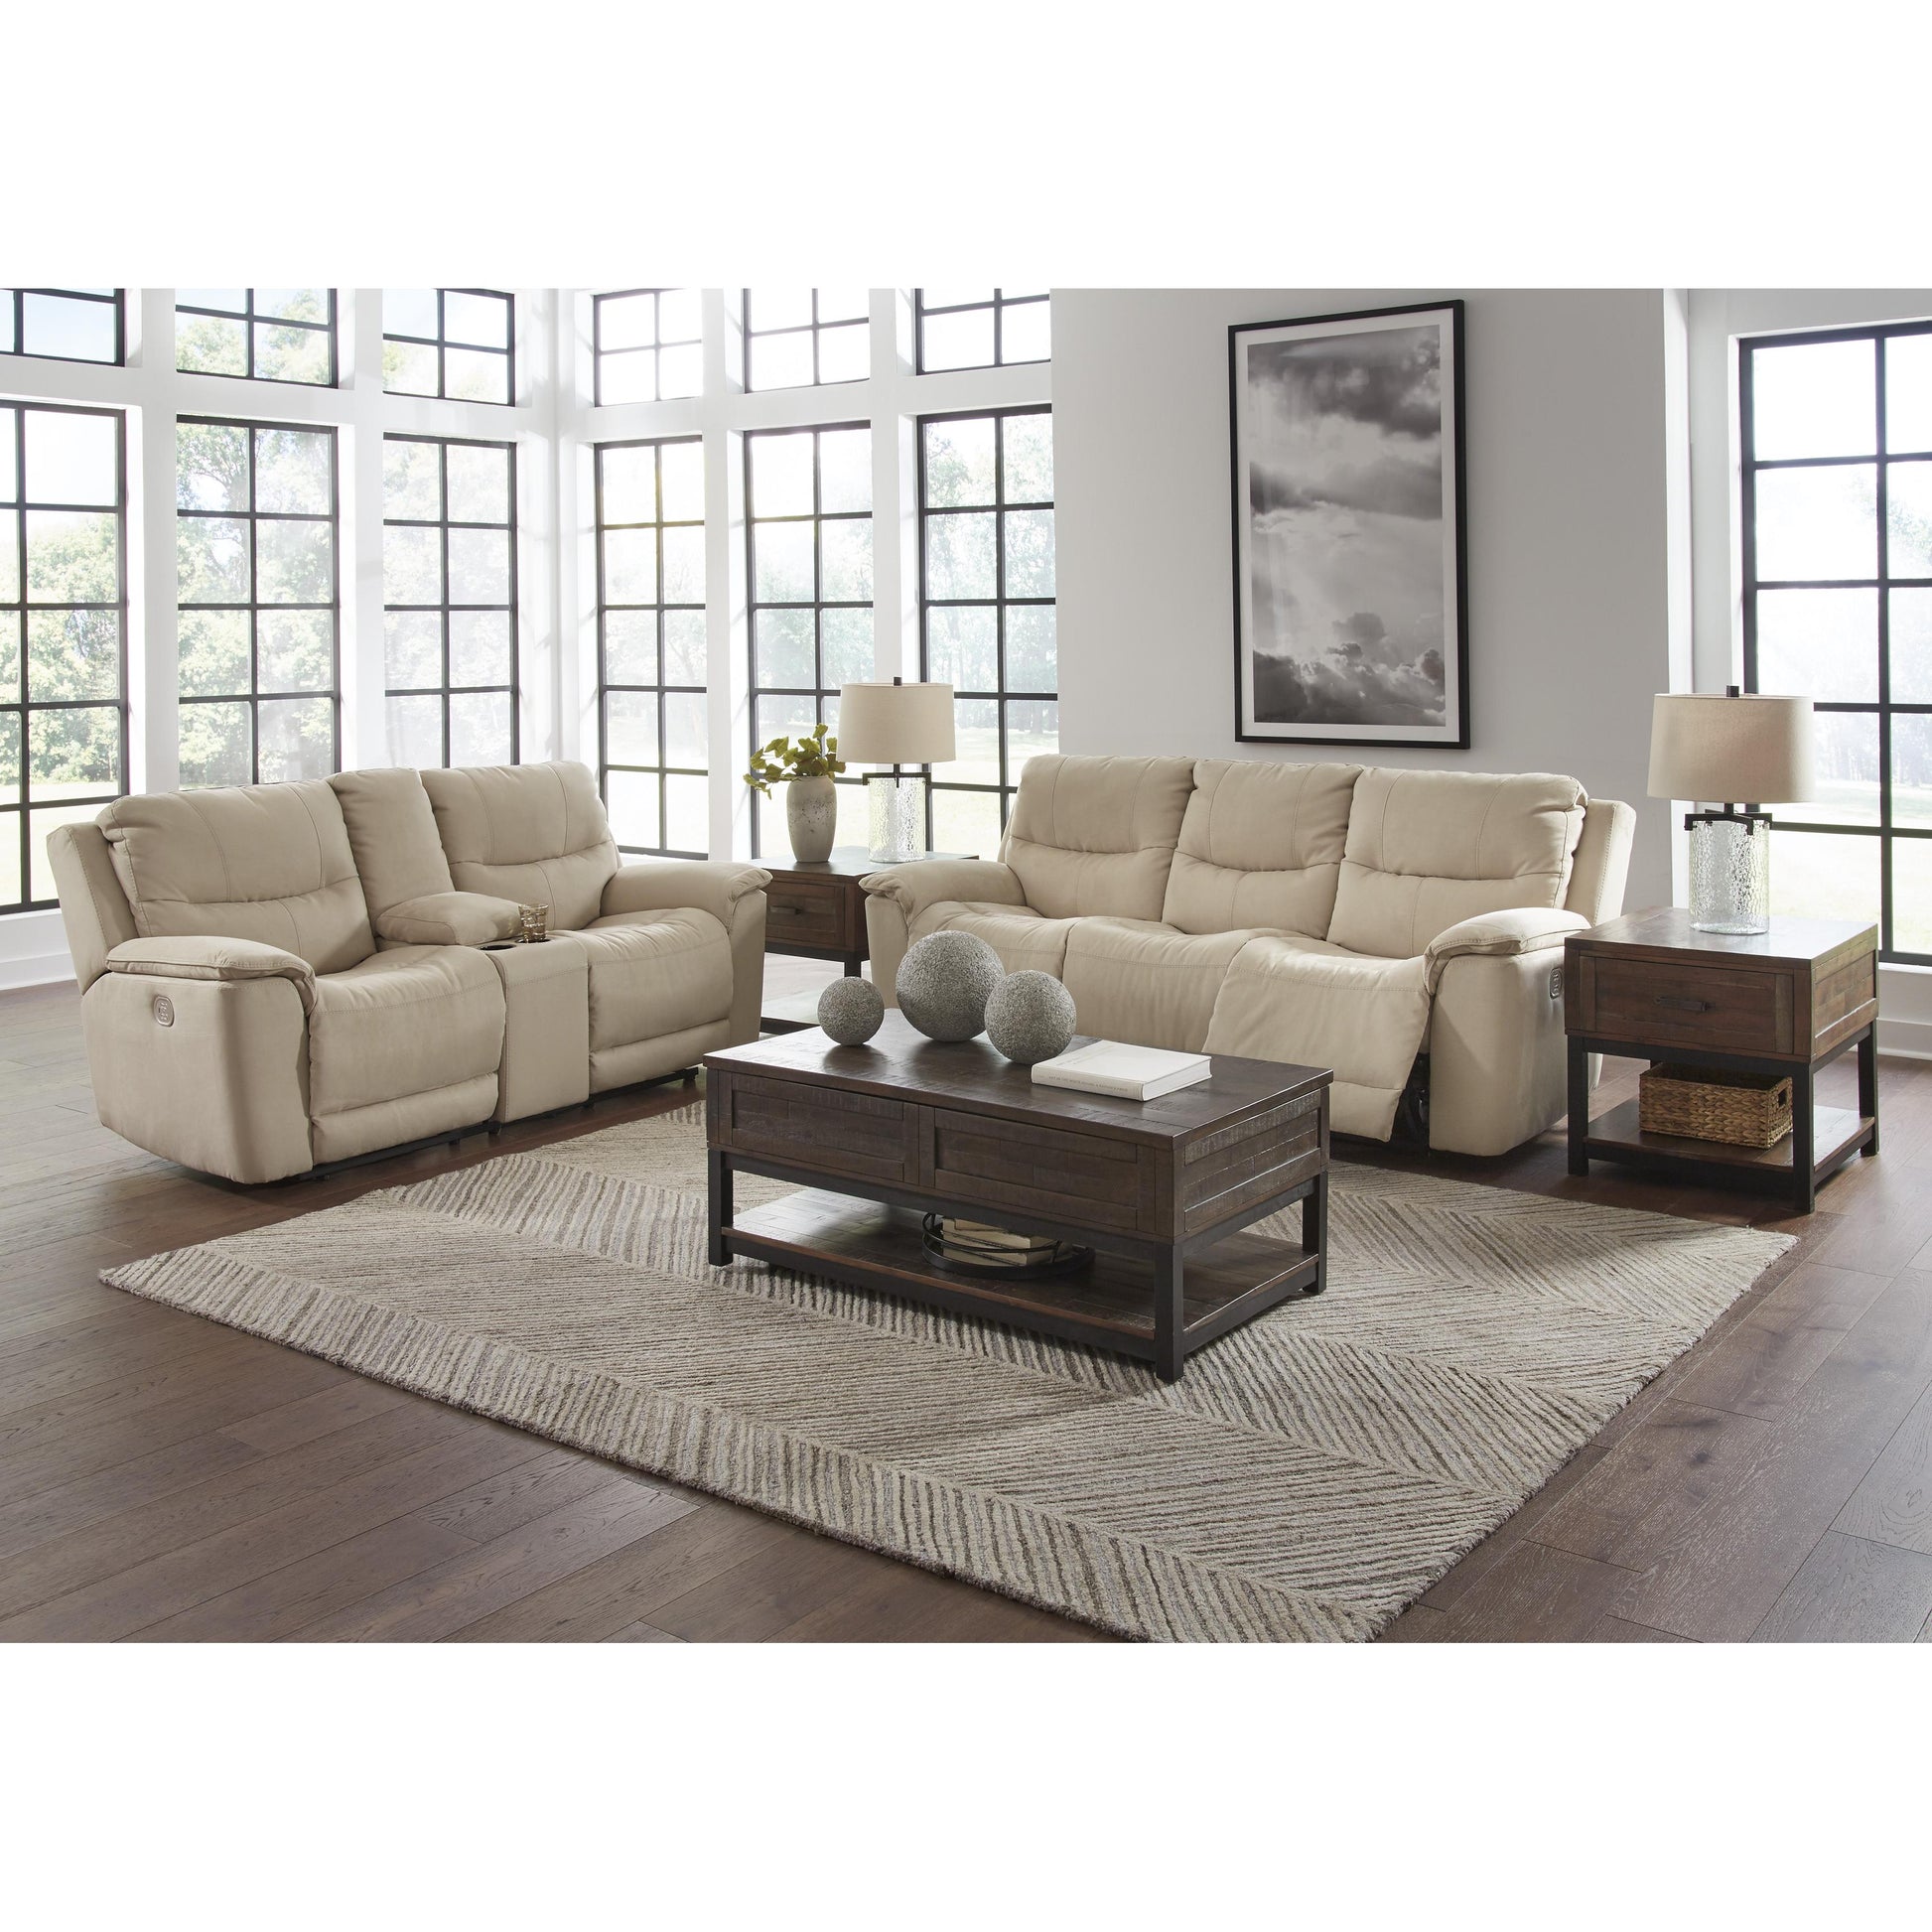 Signature Design by Ashley Next-Gen Gaucho Power Reclining Leather Look Sofa 6080715 IMAGE 11